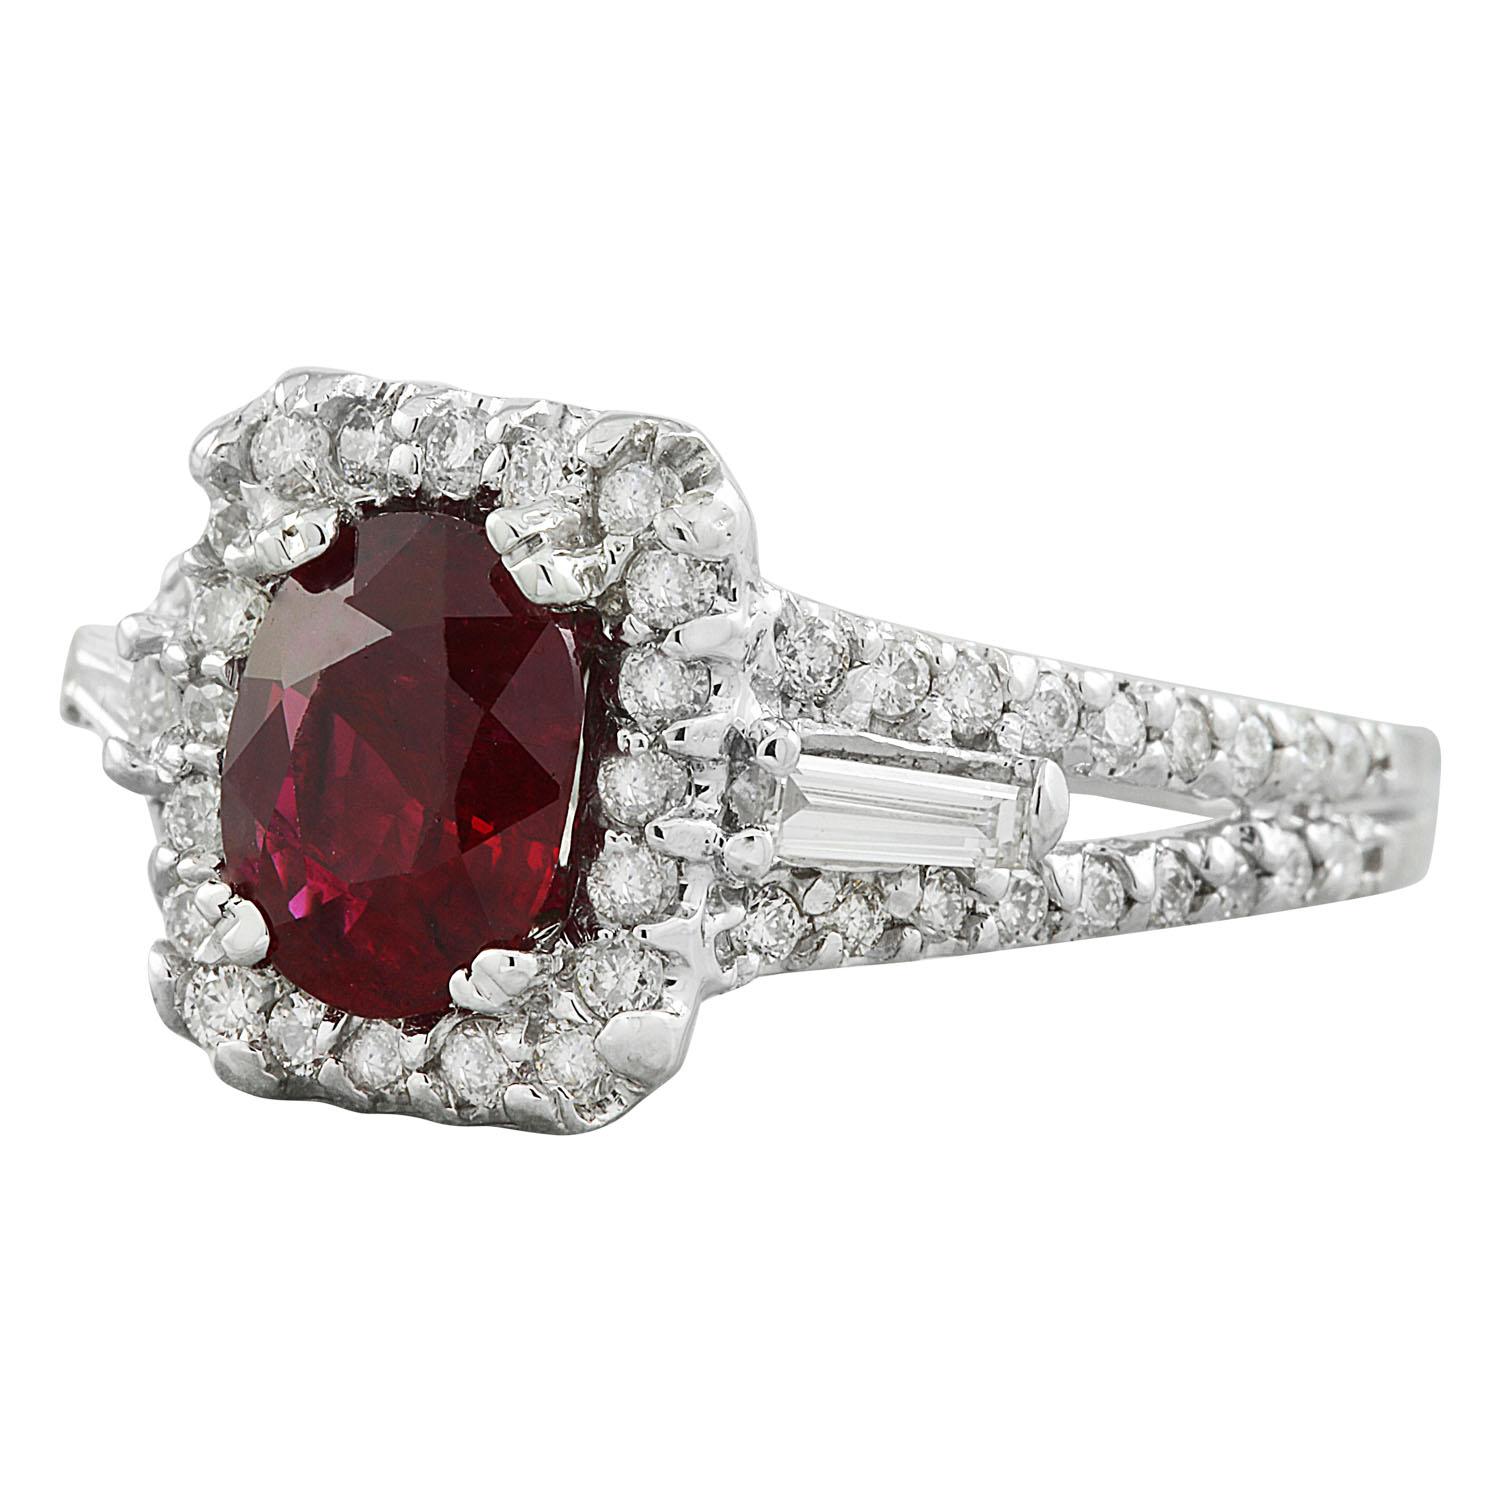 2.38 Carat Natural Ruby 14 Karat Solid White Gold Diamond Ring
Stamped: 14K 
Total Ring Weight: 6 Grams
Ruby Weight 1.38 Carat (8.00x6.00 Millimeters)
Diamond Weight: 1.00 carat (F-G Color, VS2-SI1 Clarity )
Face Measures: 16.90x20.25 Millimeter